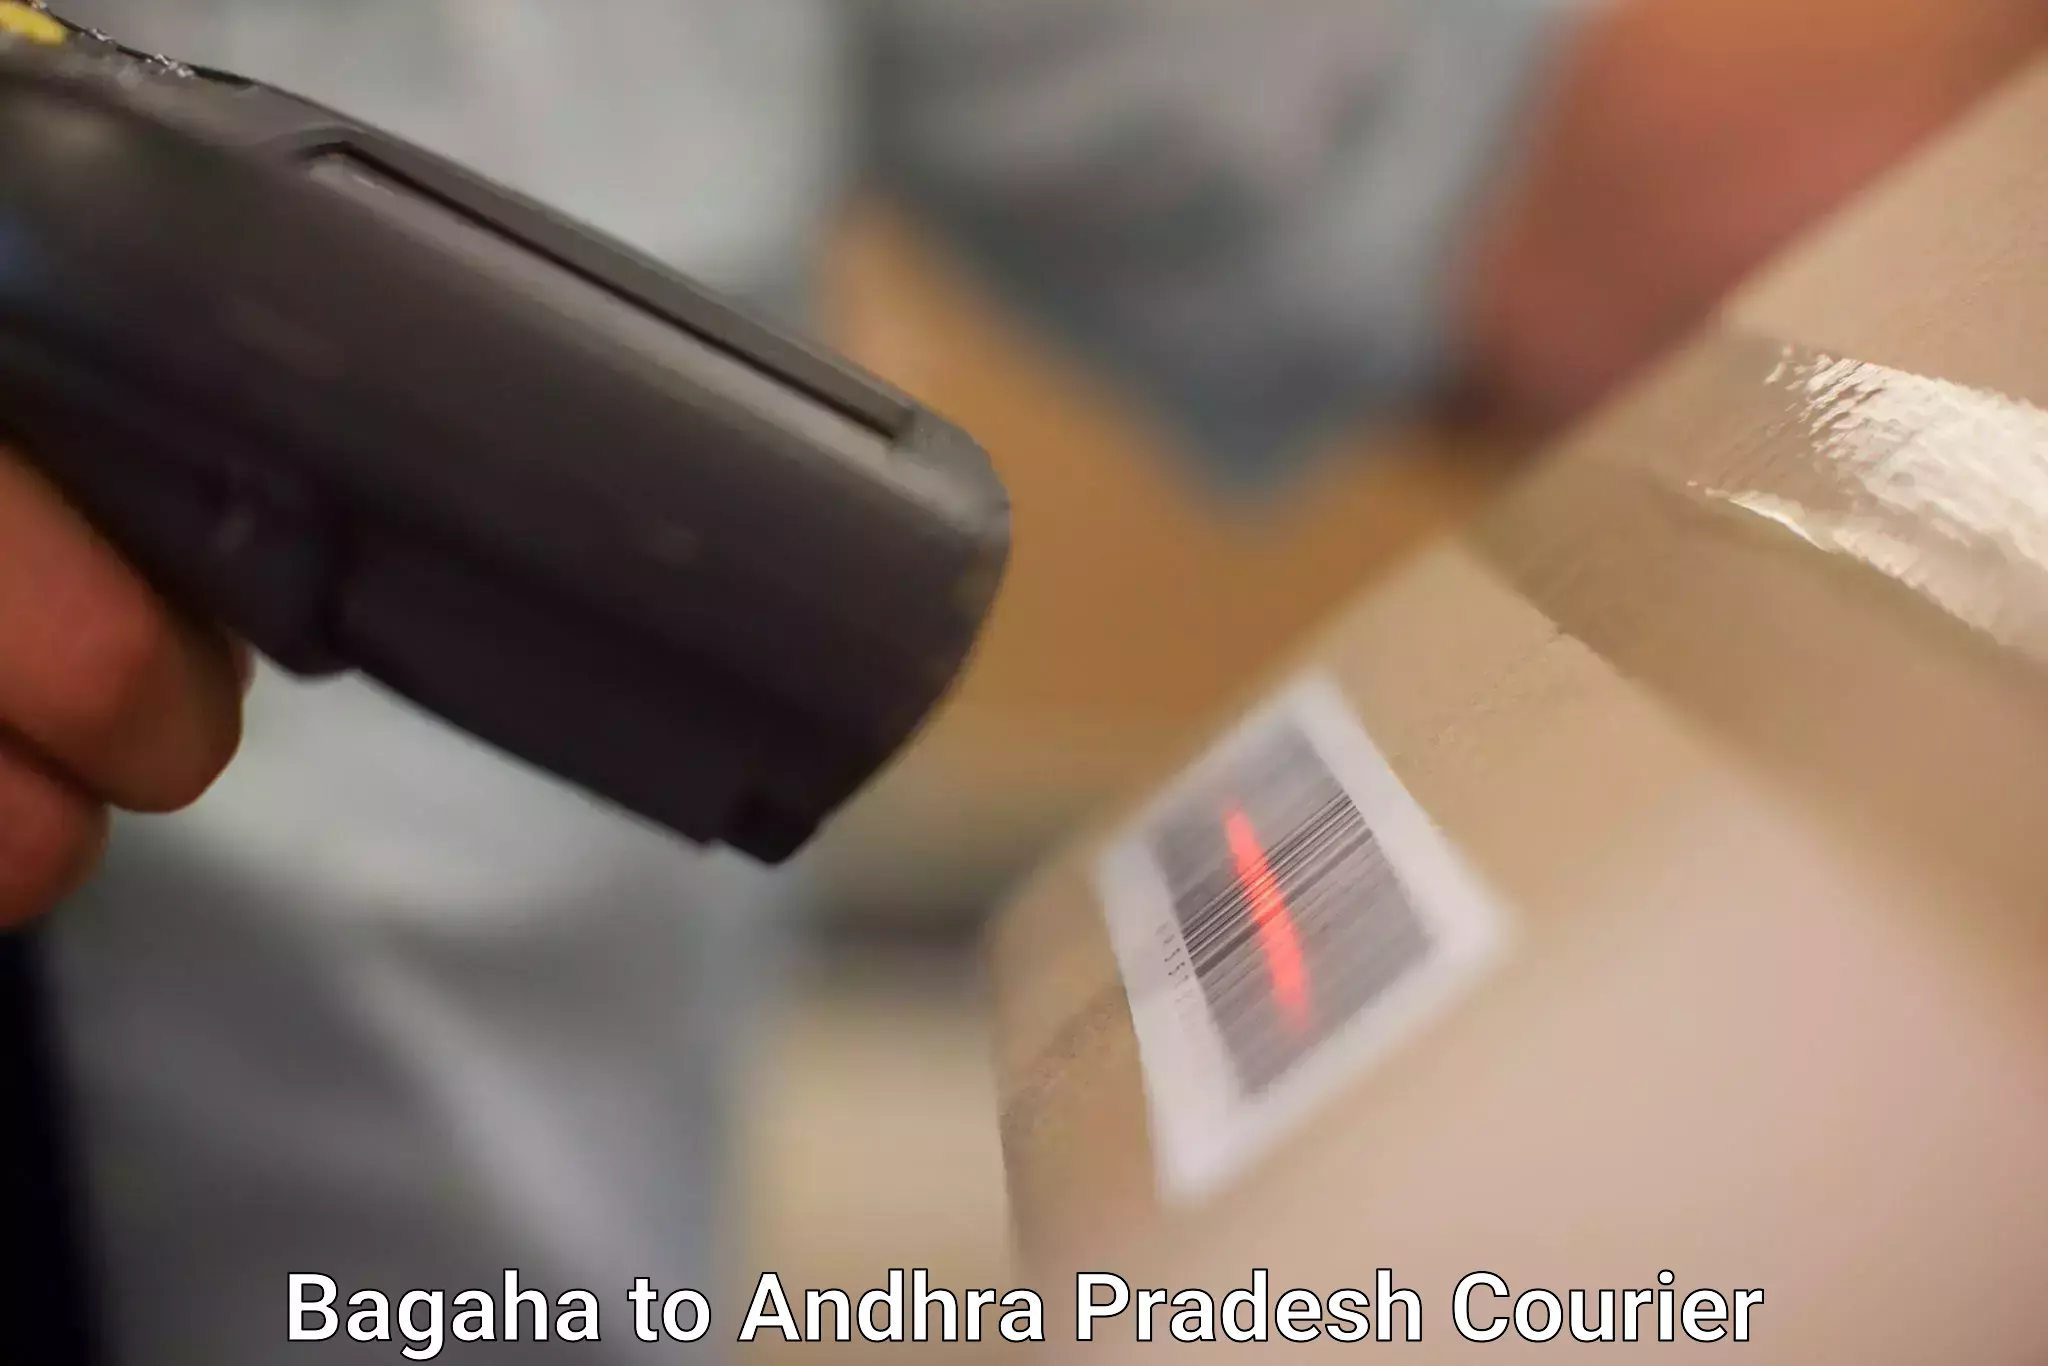 Easy access courier services Bagaha to Sompeta